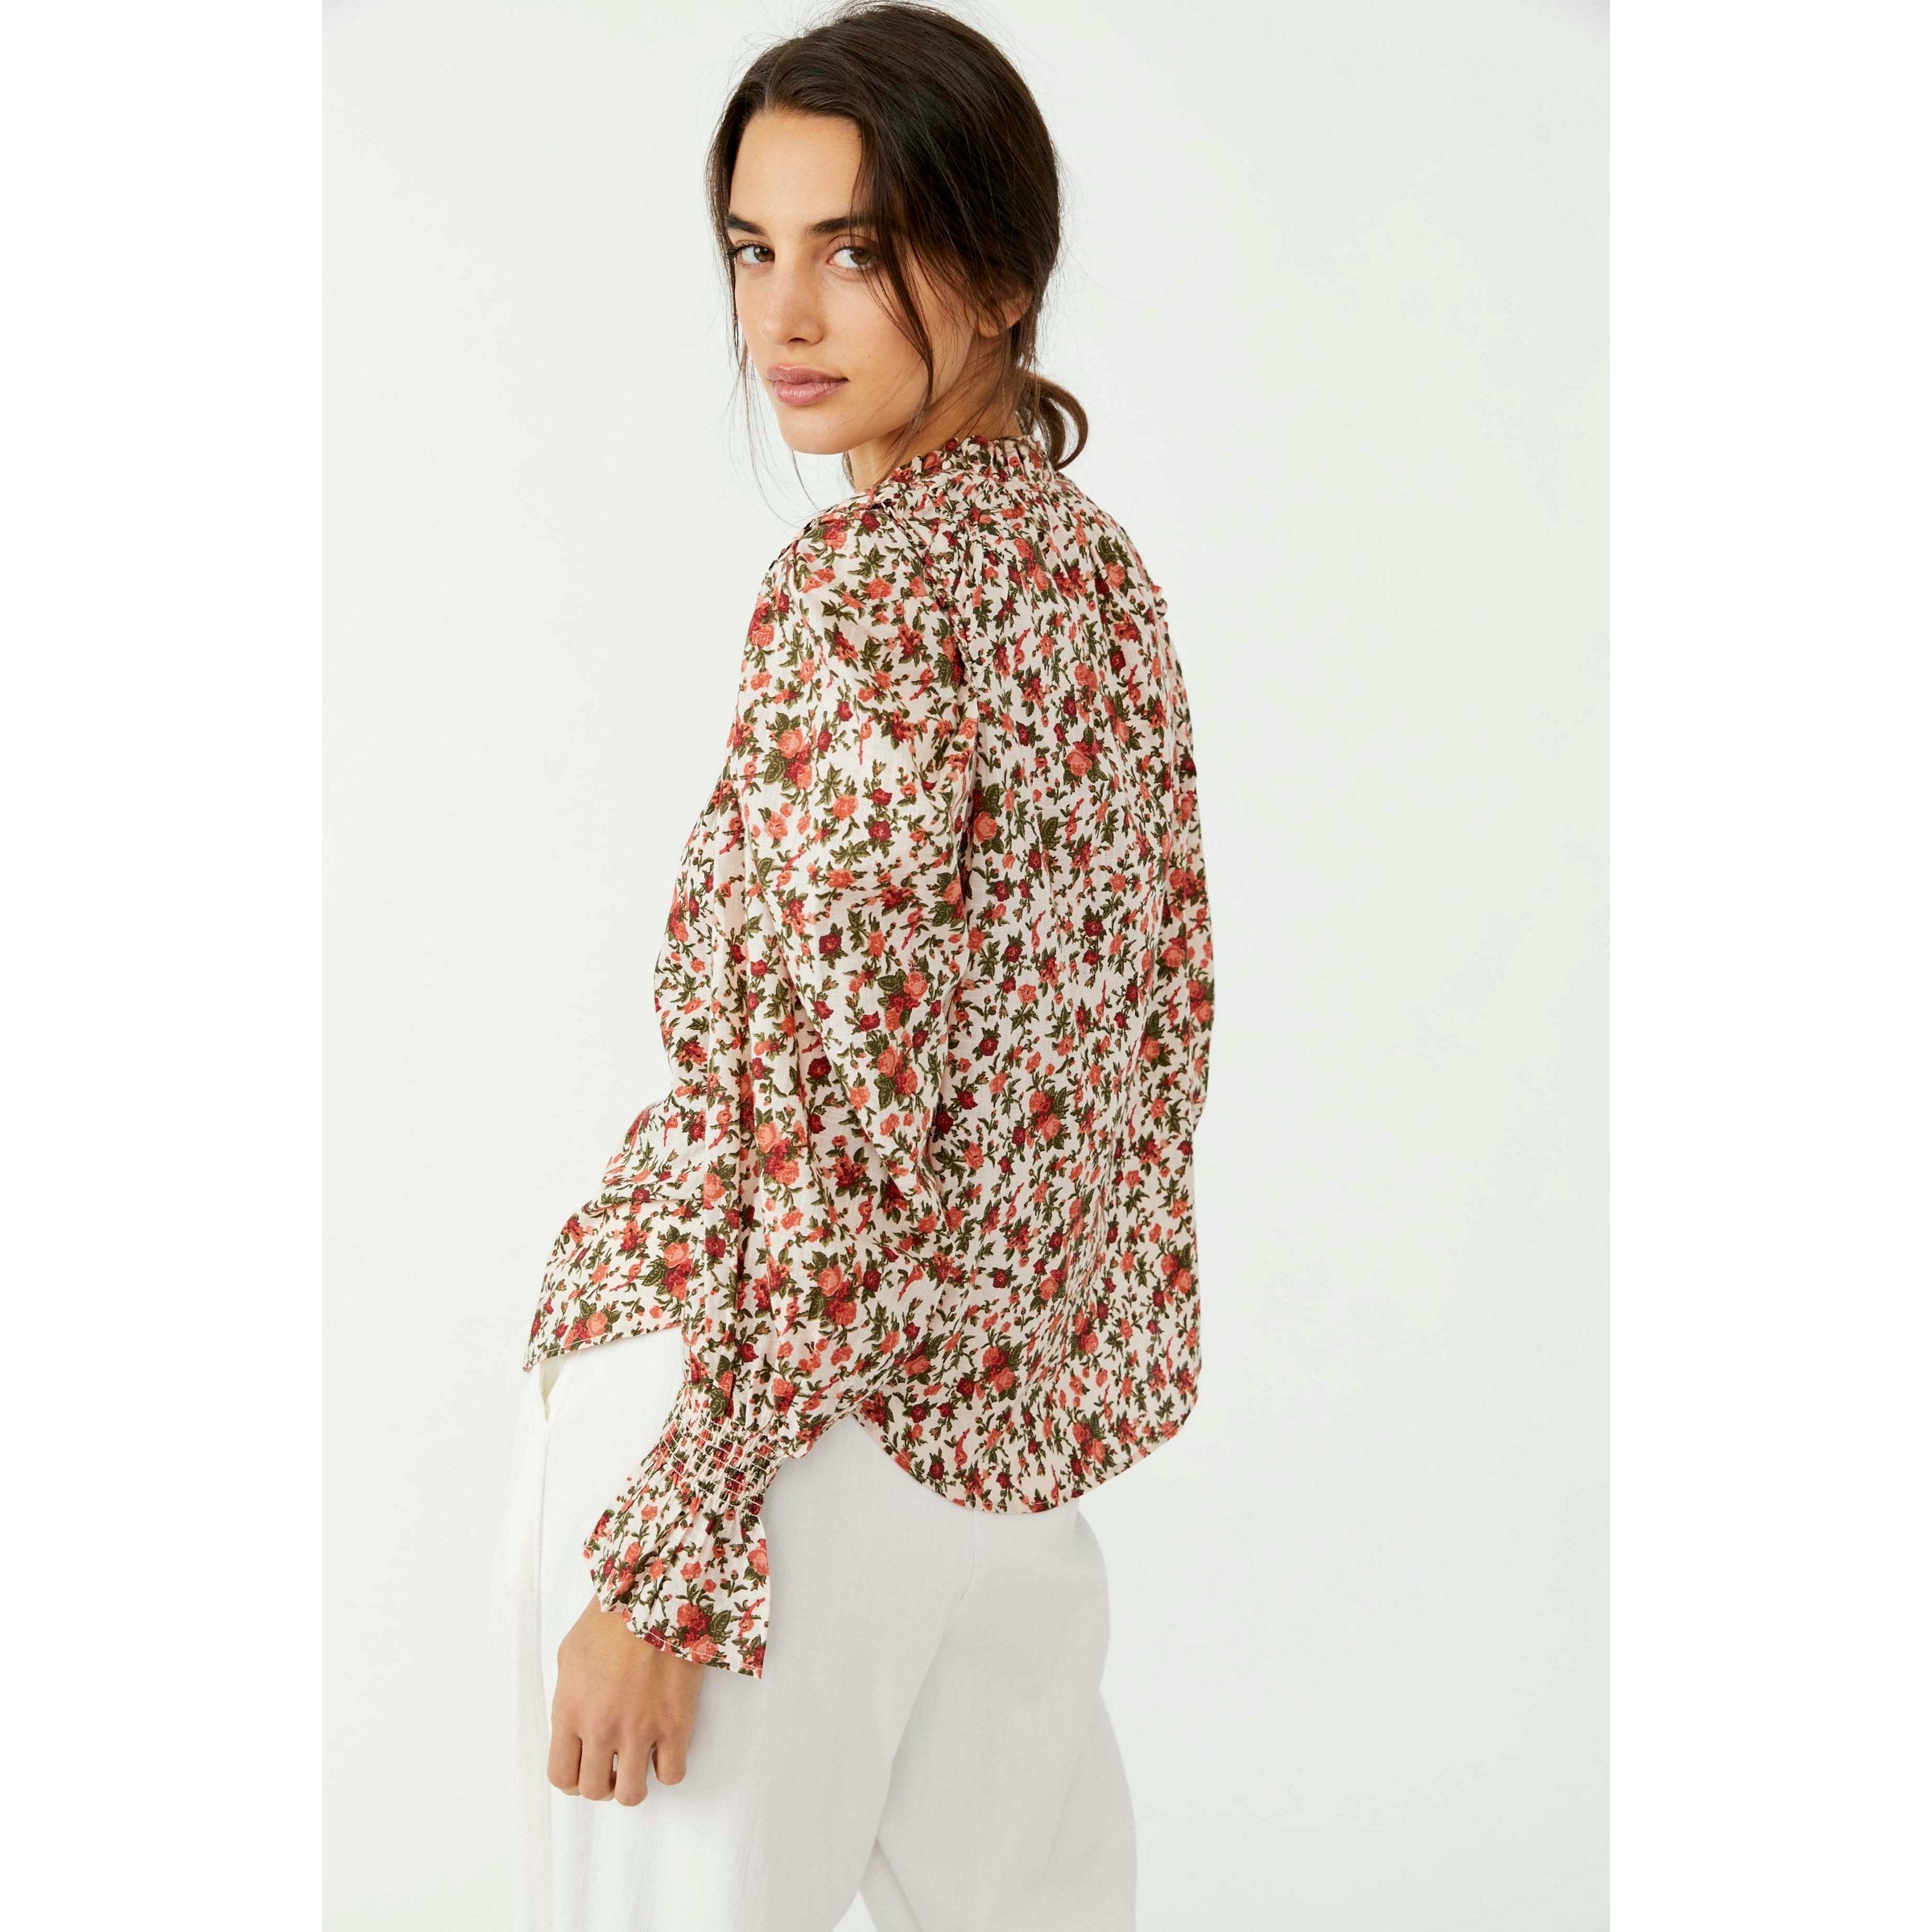 Meant To Be Blouse